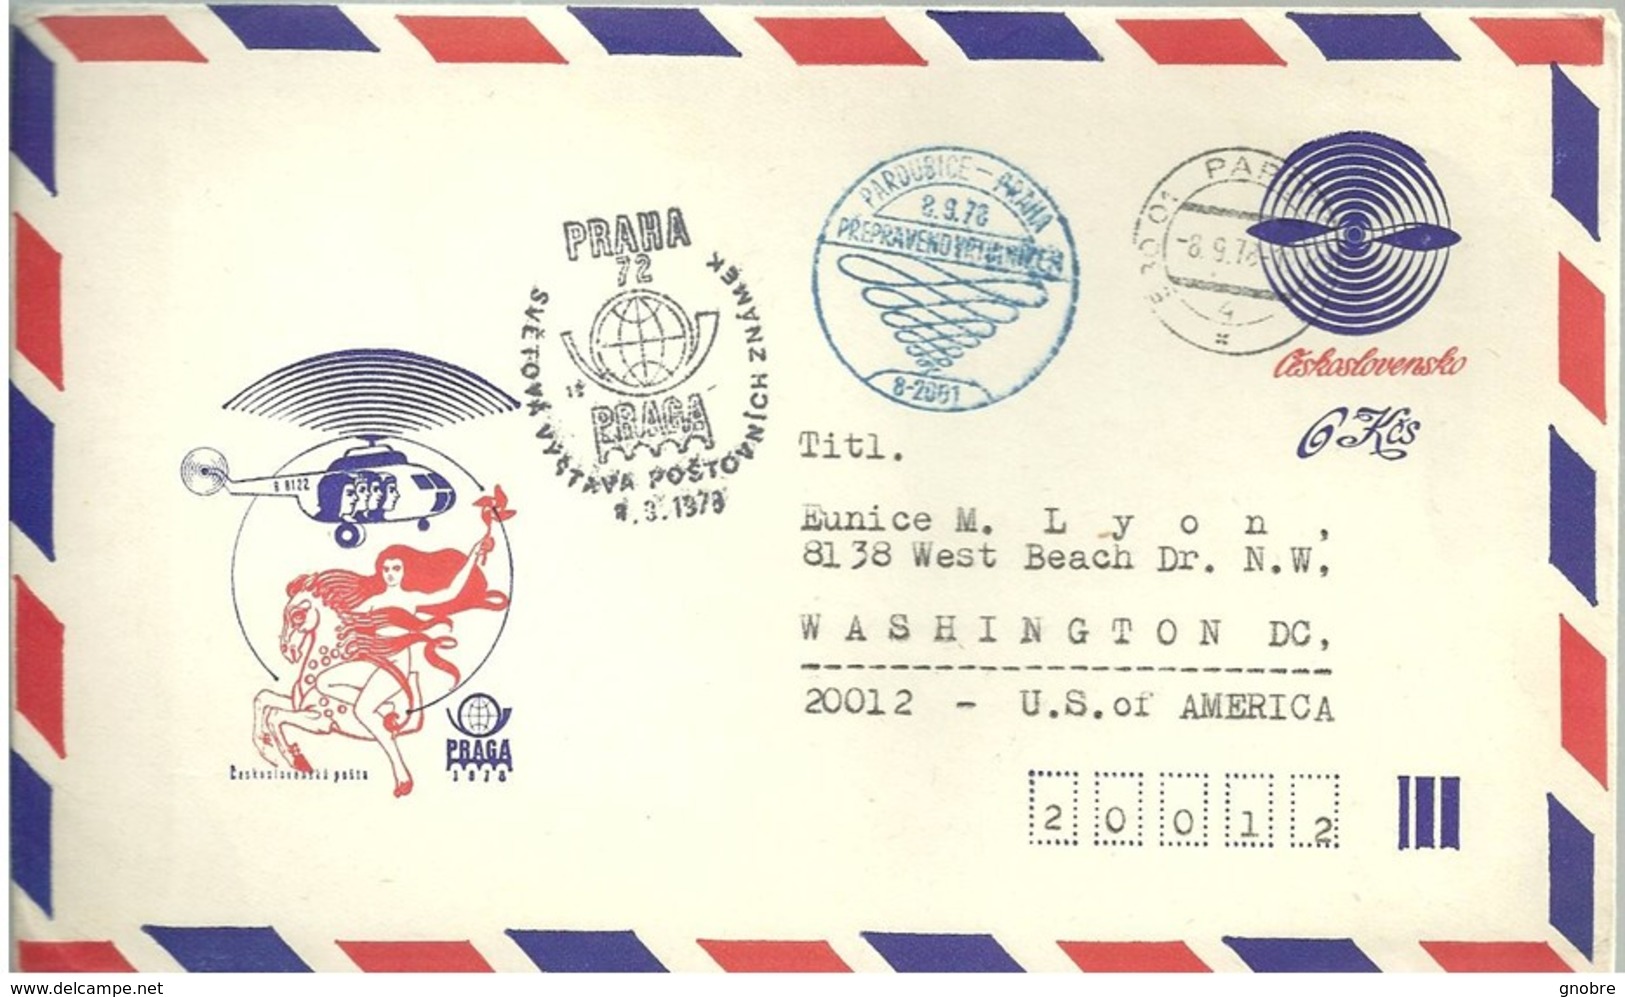 CZECHOSLOVAKIA To USA Cover Prepaid Stationery Sent In 1978 - Great Cancel - Woman Helicopter (GN 0278) - Enveloppes